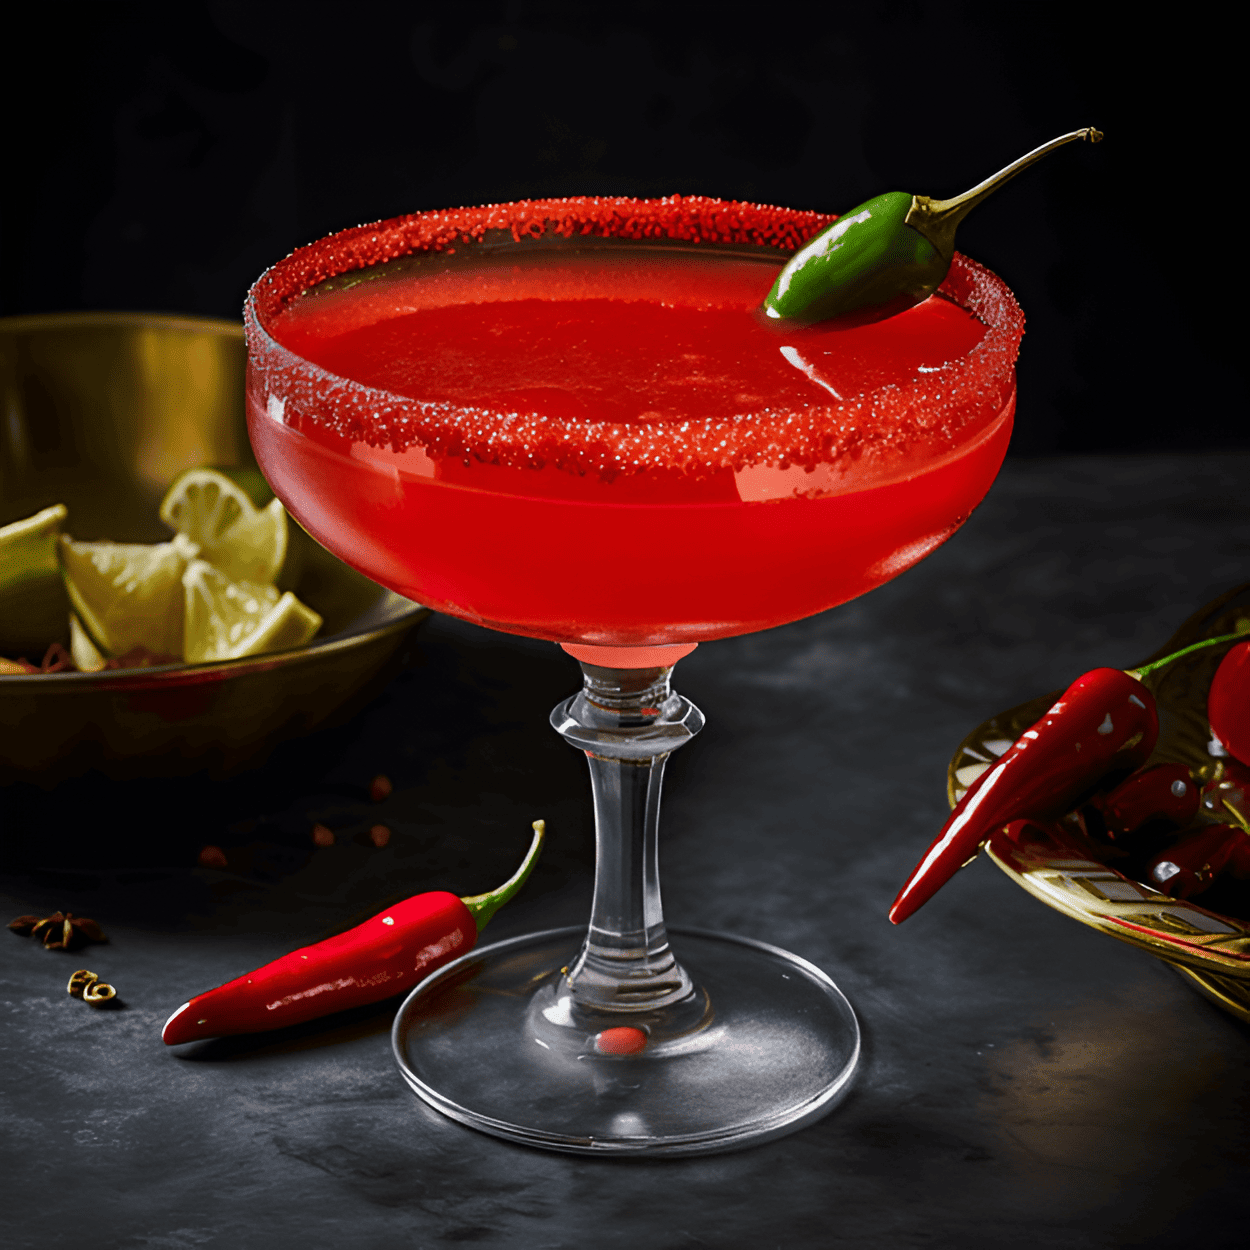 Lick My Chili Cocktail Recipe - The Lick My Chili cocktail is a fiery blend of sweet and spicy. The chili-infused tequila gives it a strong, spicy kick, while the sweet agave nectar and lime juice balance it out with a refreshing tanginess. The result is a bold, robust cocktail with a lingering heat that tantalizes the taste buds.